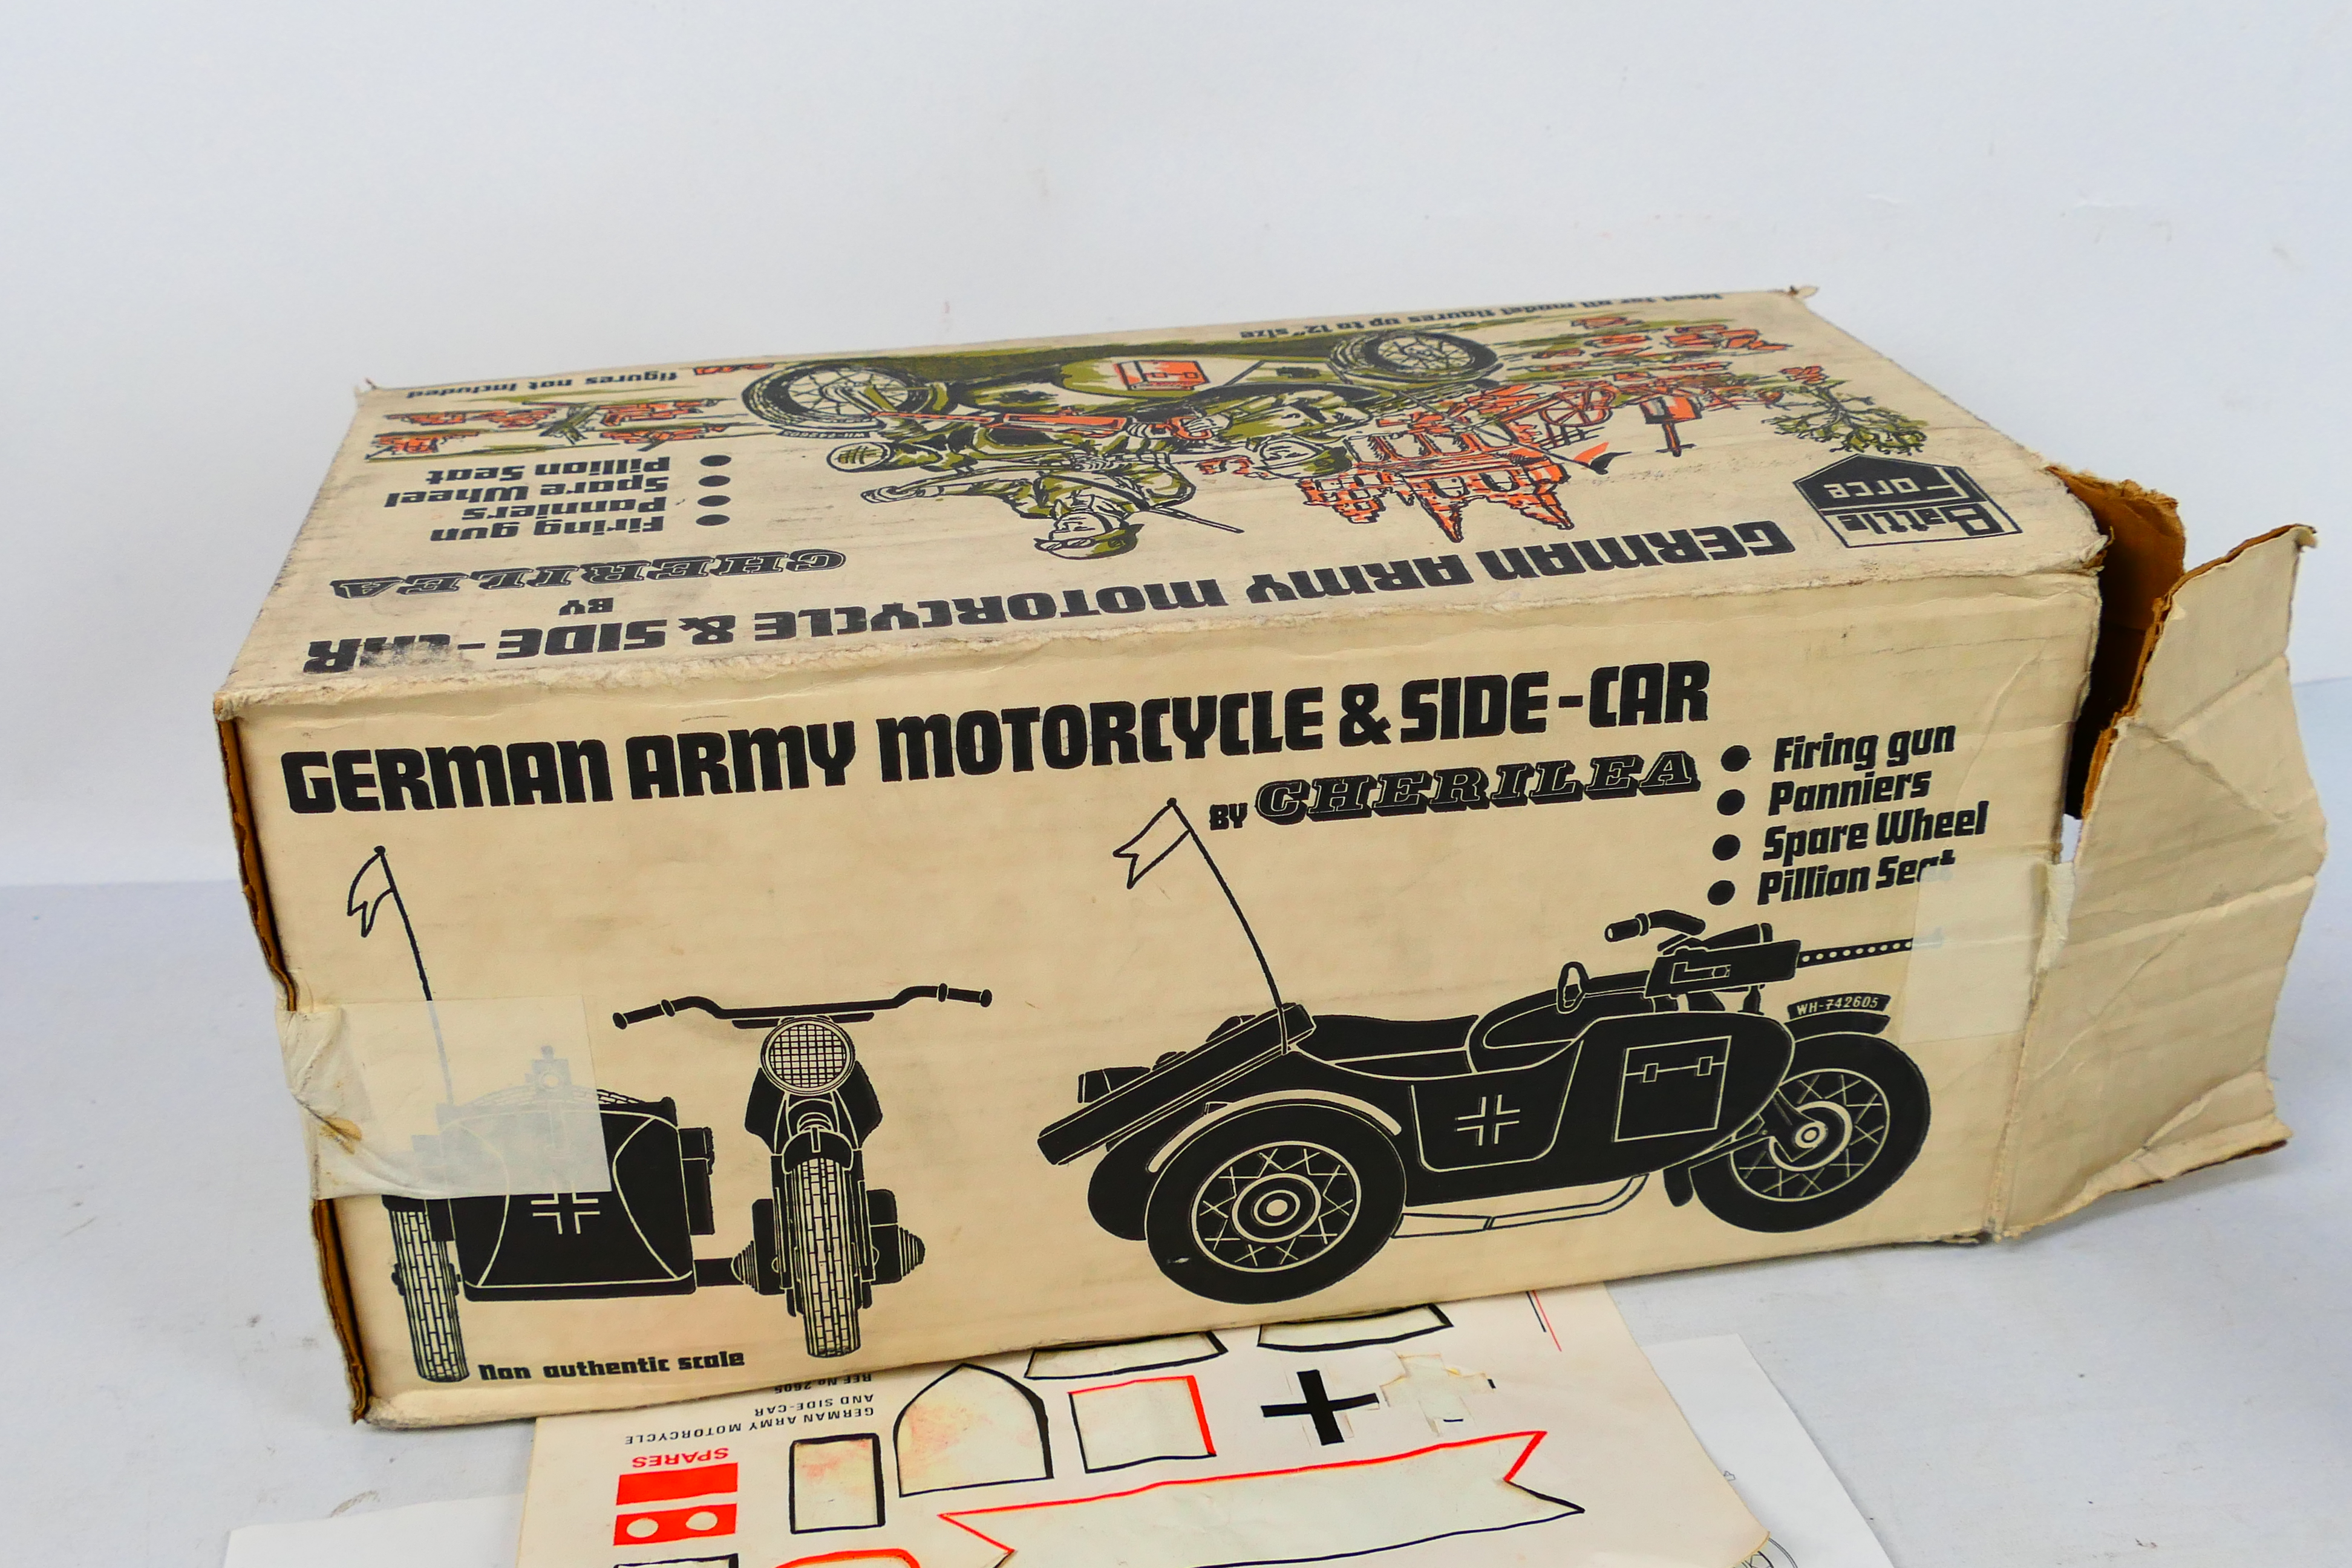 Cherilea Toys - Battle Force. A boxed Cherilea Toys made German Army Motorcycle & Sidecar #2605. - Image 8 of 8